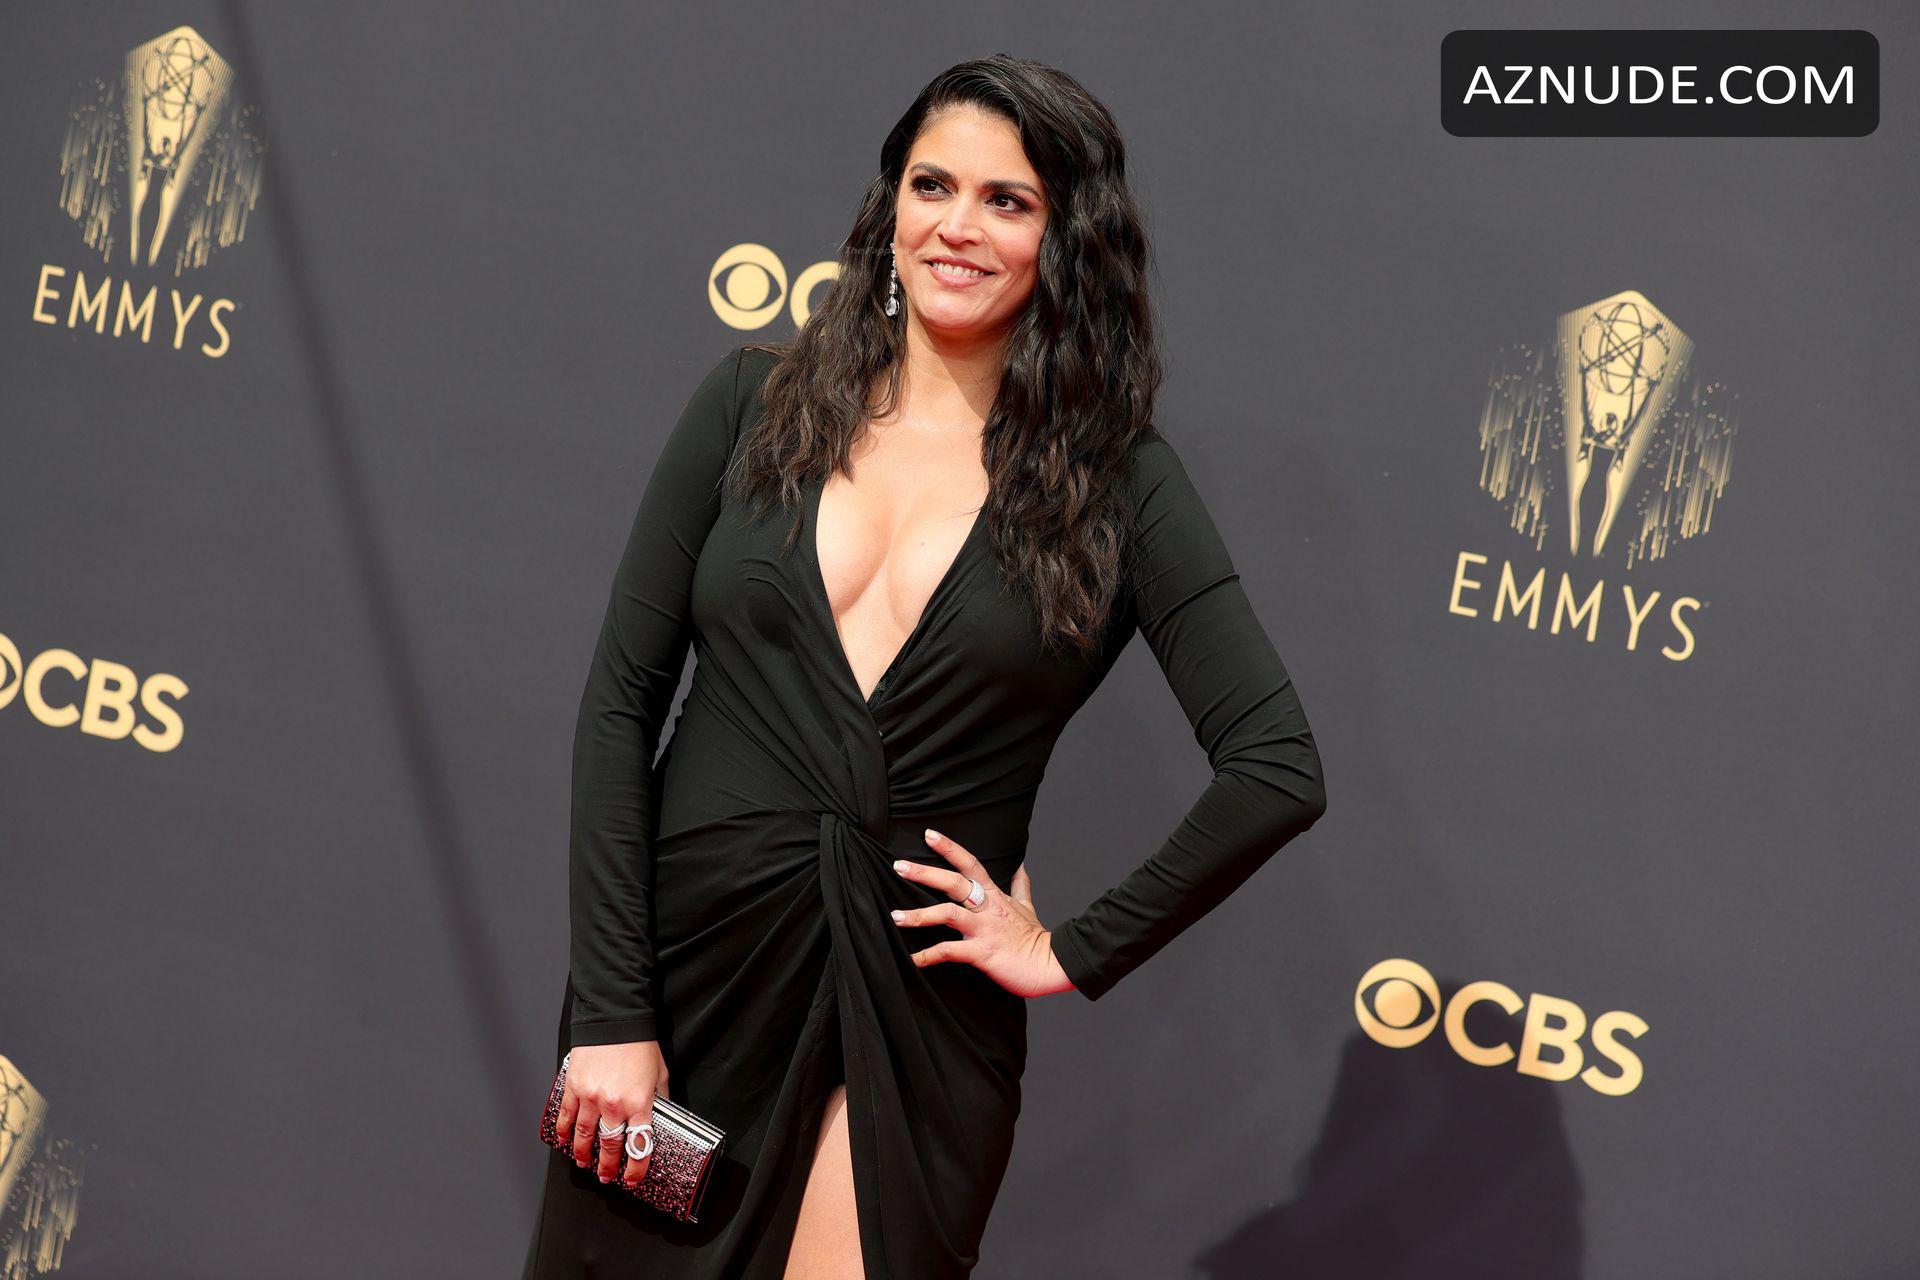 Cecily strong naked pics